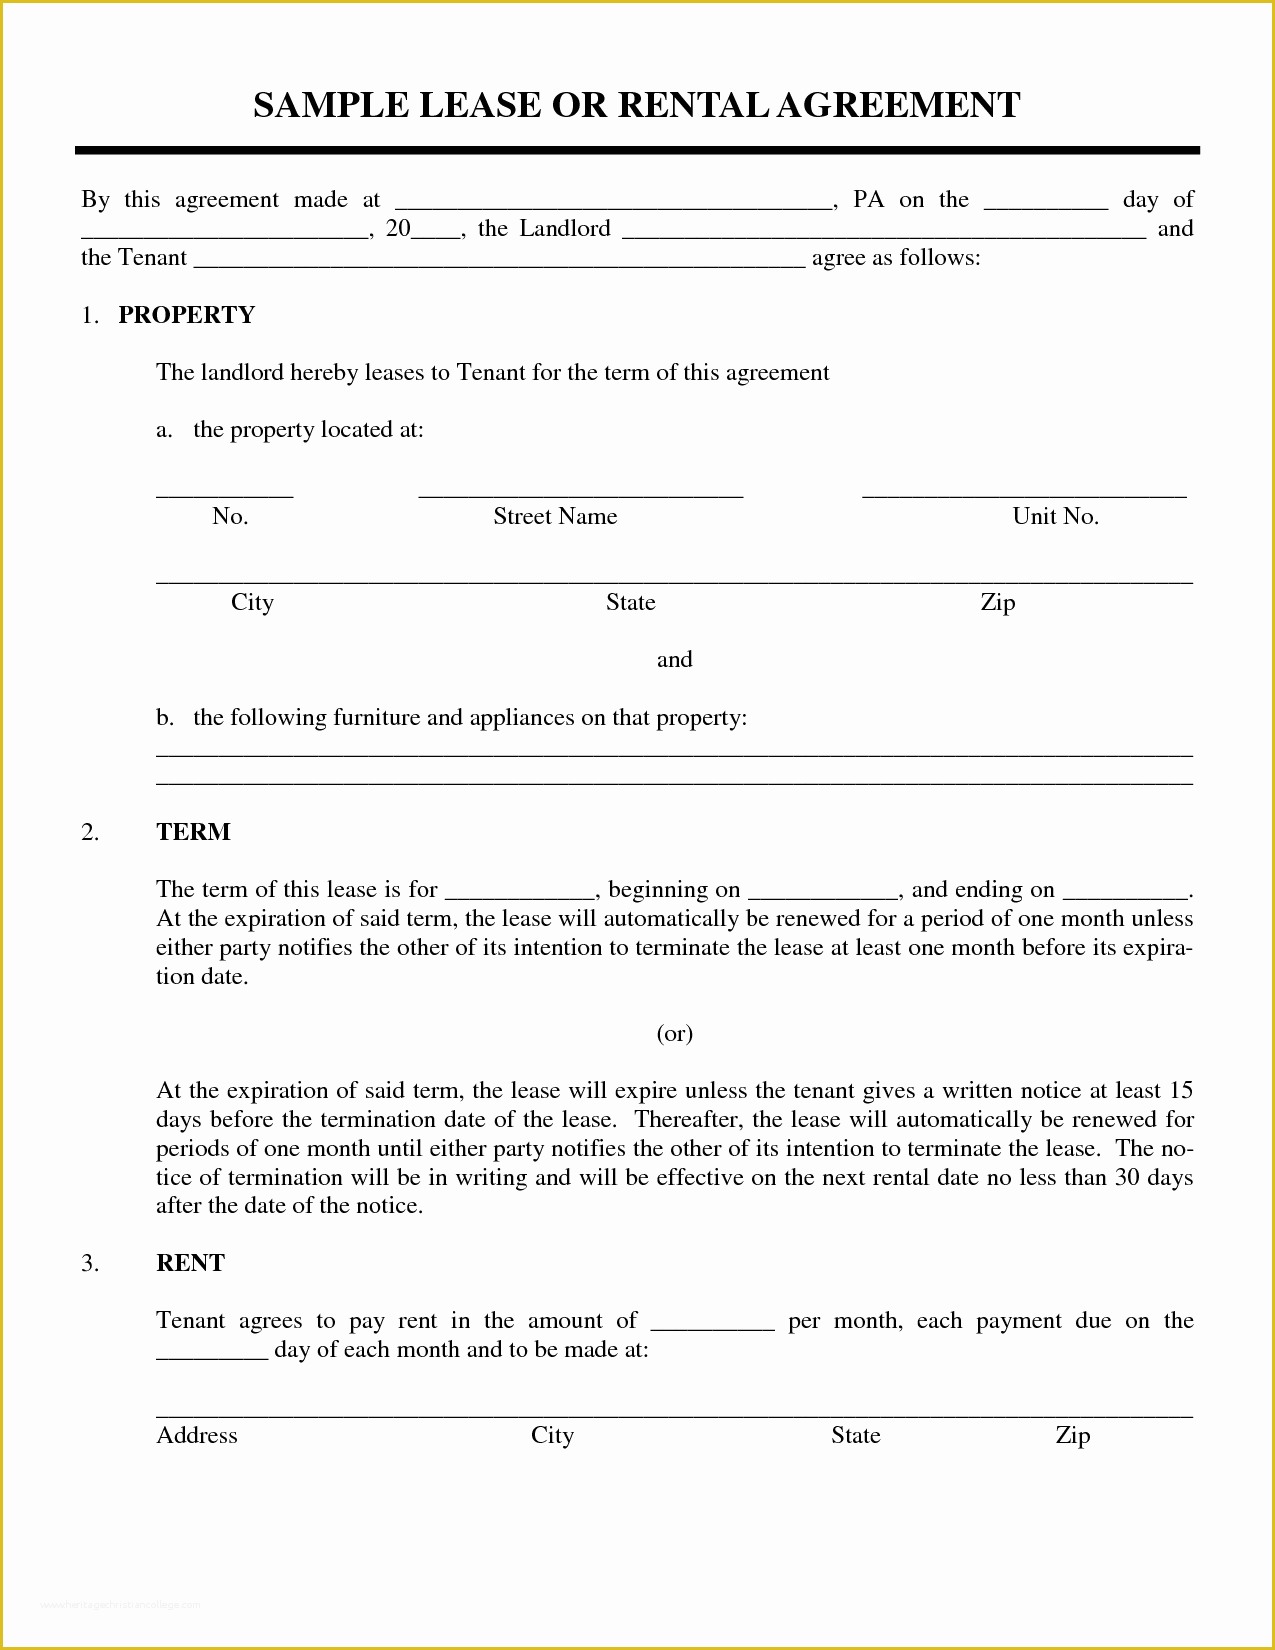 Free Printable Lease Template Of Sample Lease or Rental Agreement